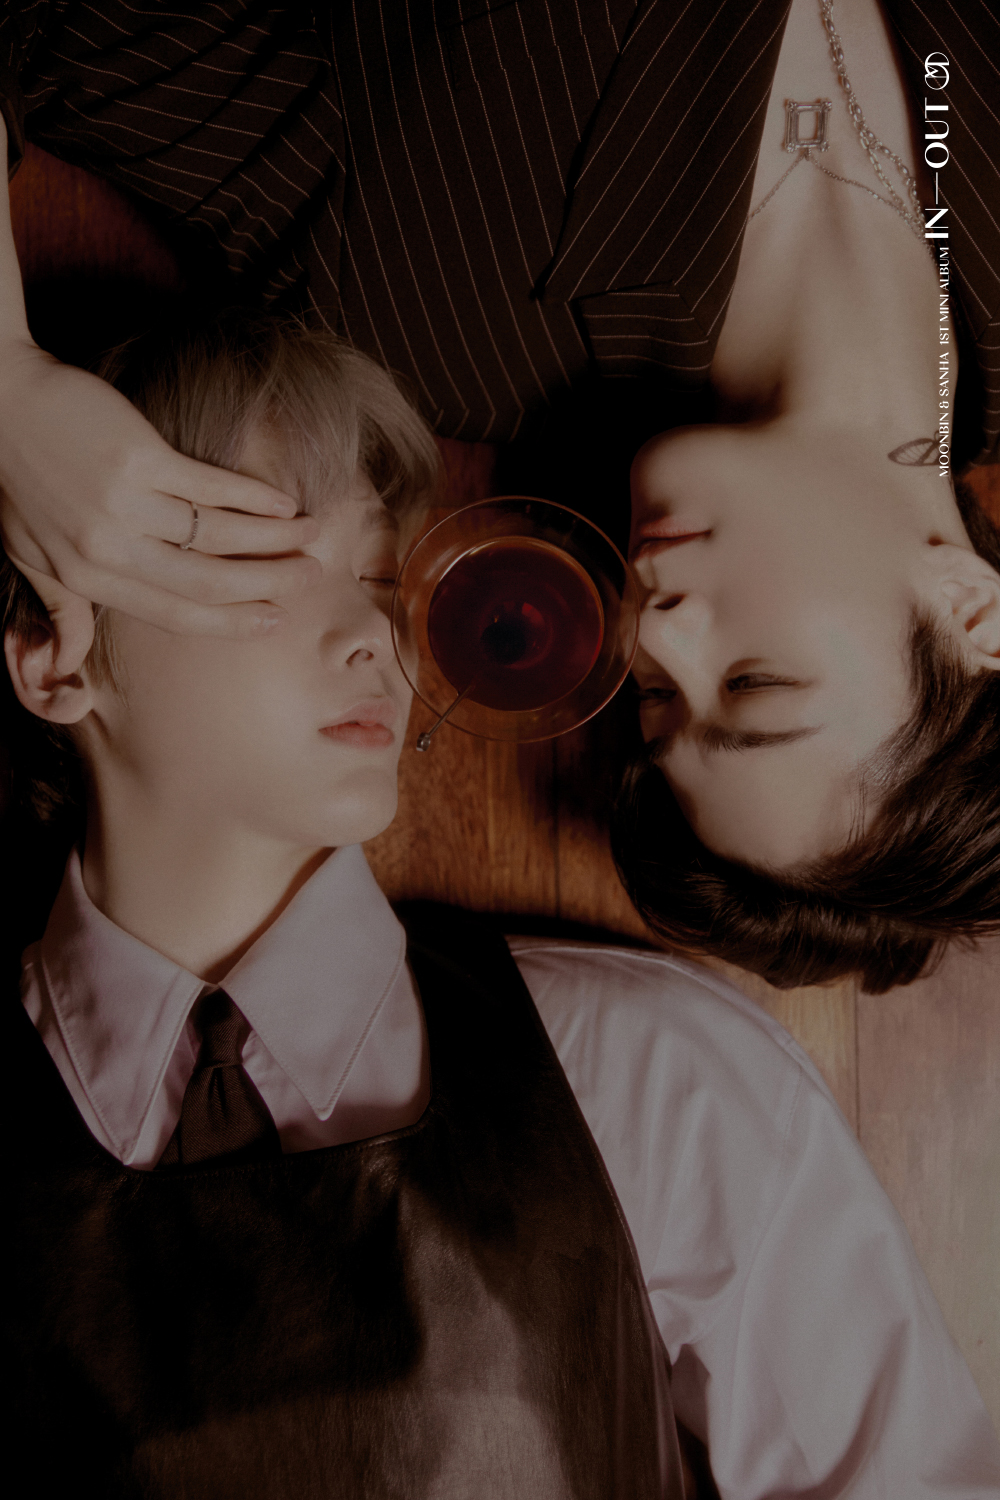 Astro Moon Bin & Sanha, "IN-OUT"